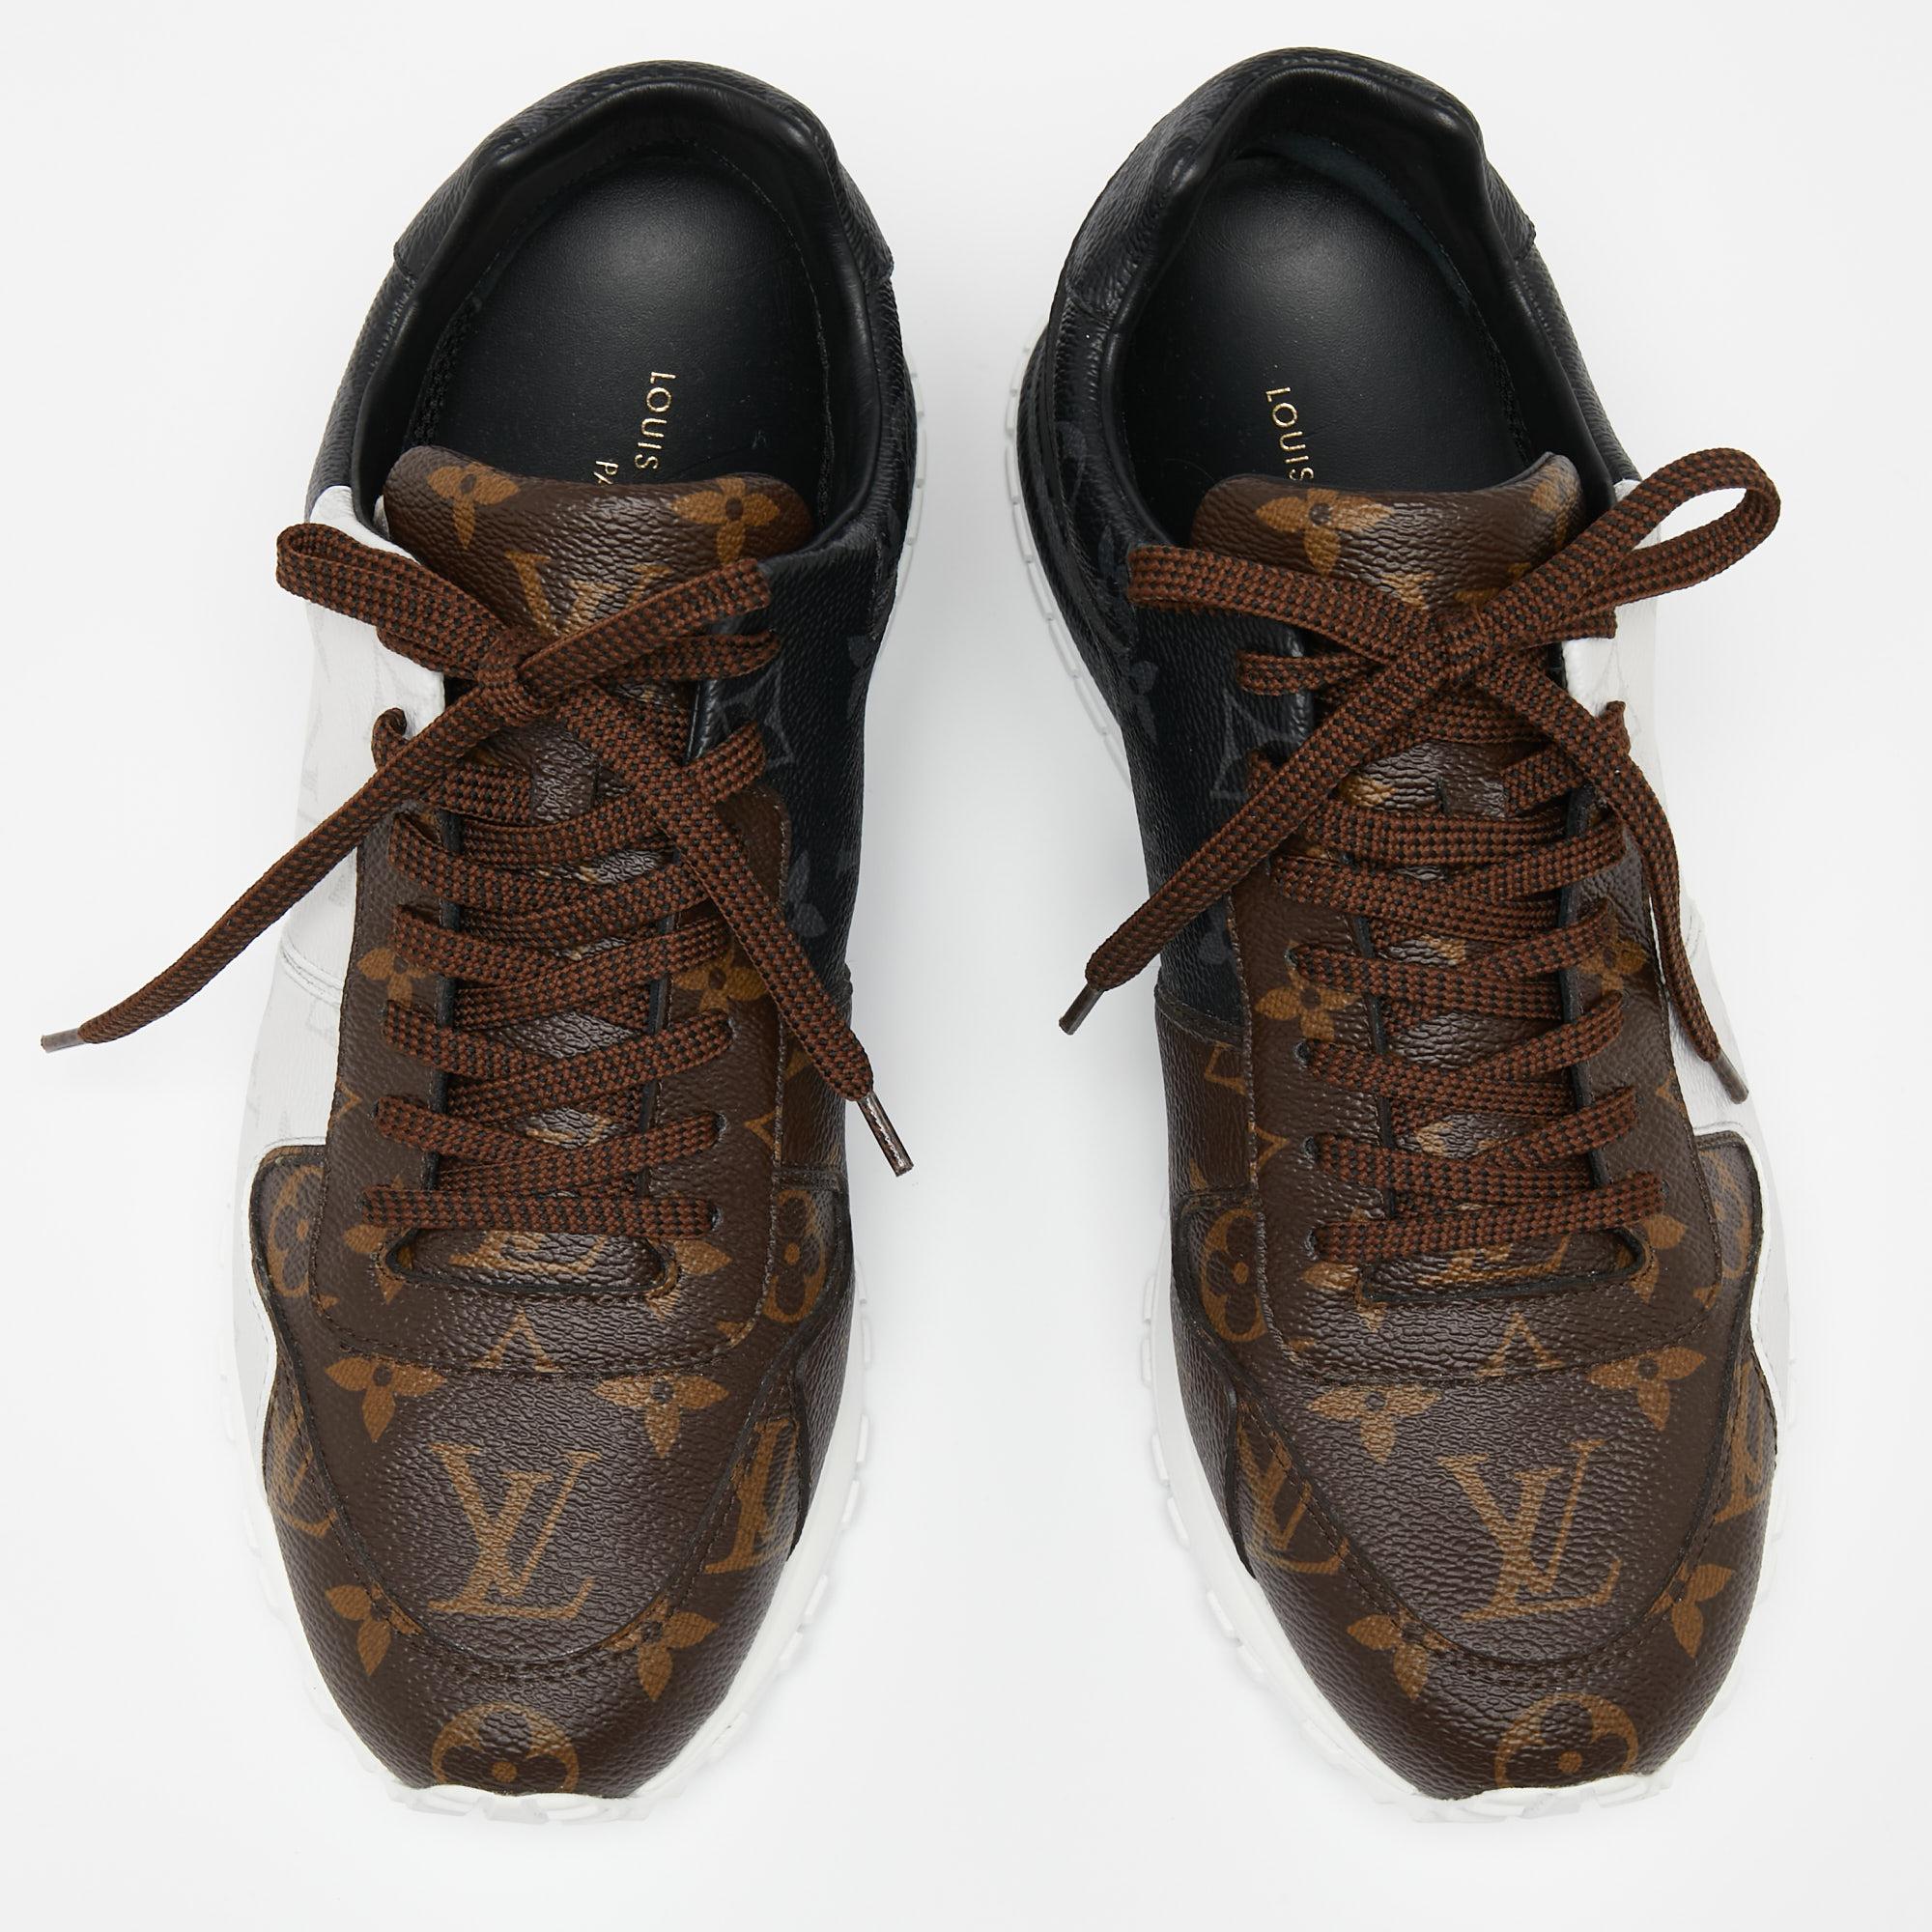 Made to provide comfort, these Run Away sneakers by Louis Vuitton are trendy and stylish. They've been crafted from quality materials and designed with lace-up vamps, logo details, and the label on the inserts. Wear them with your casual outfits for